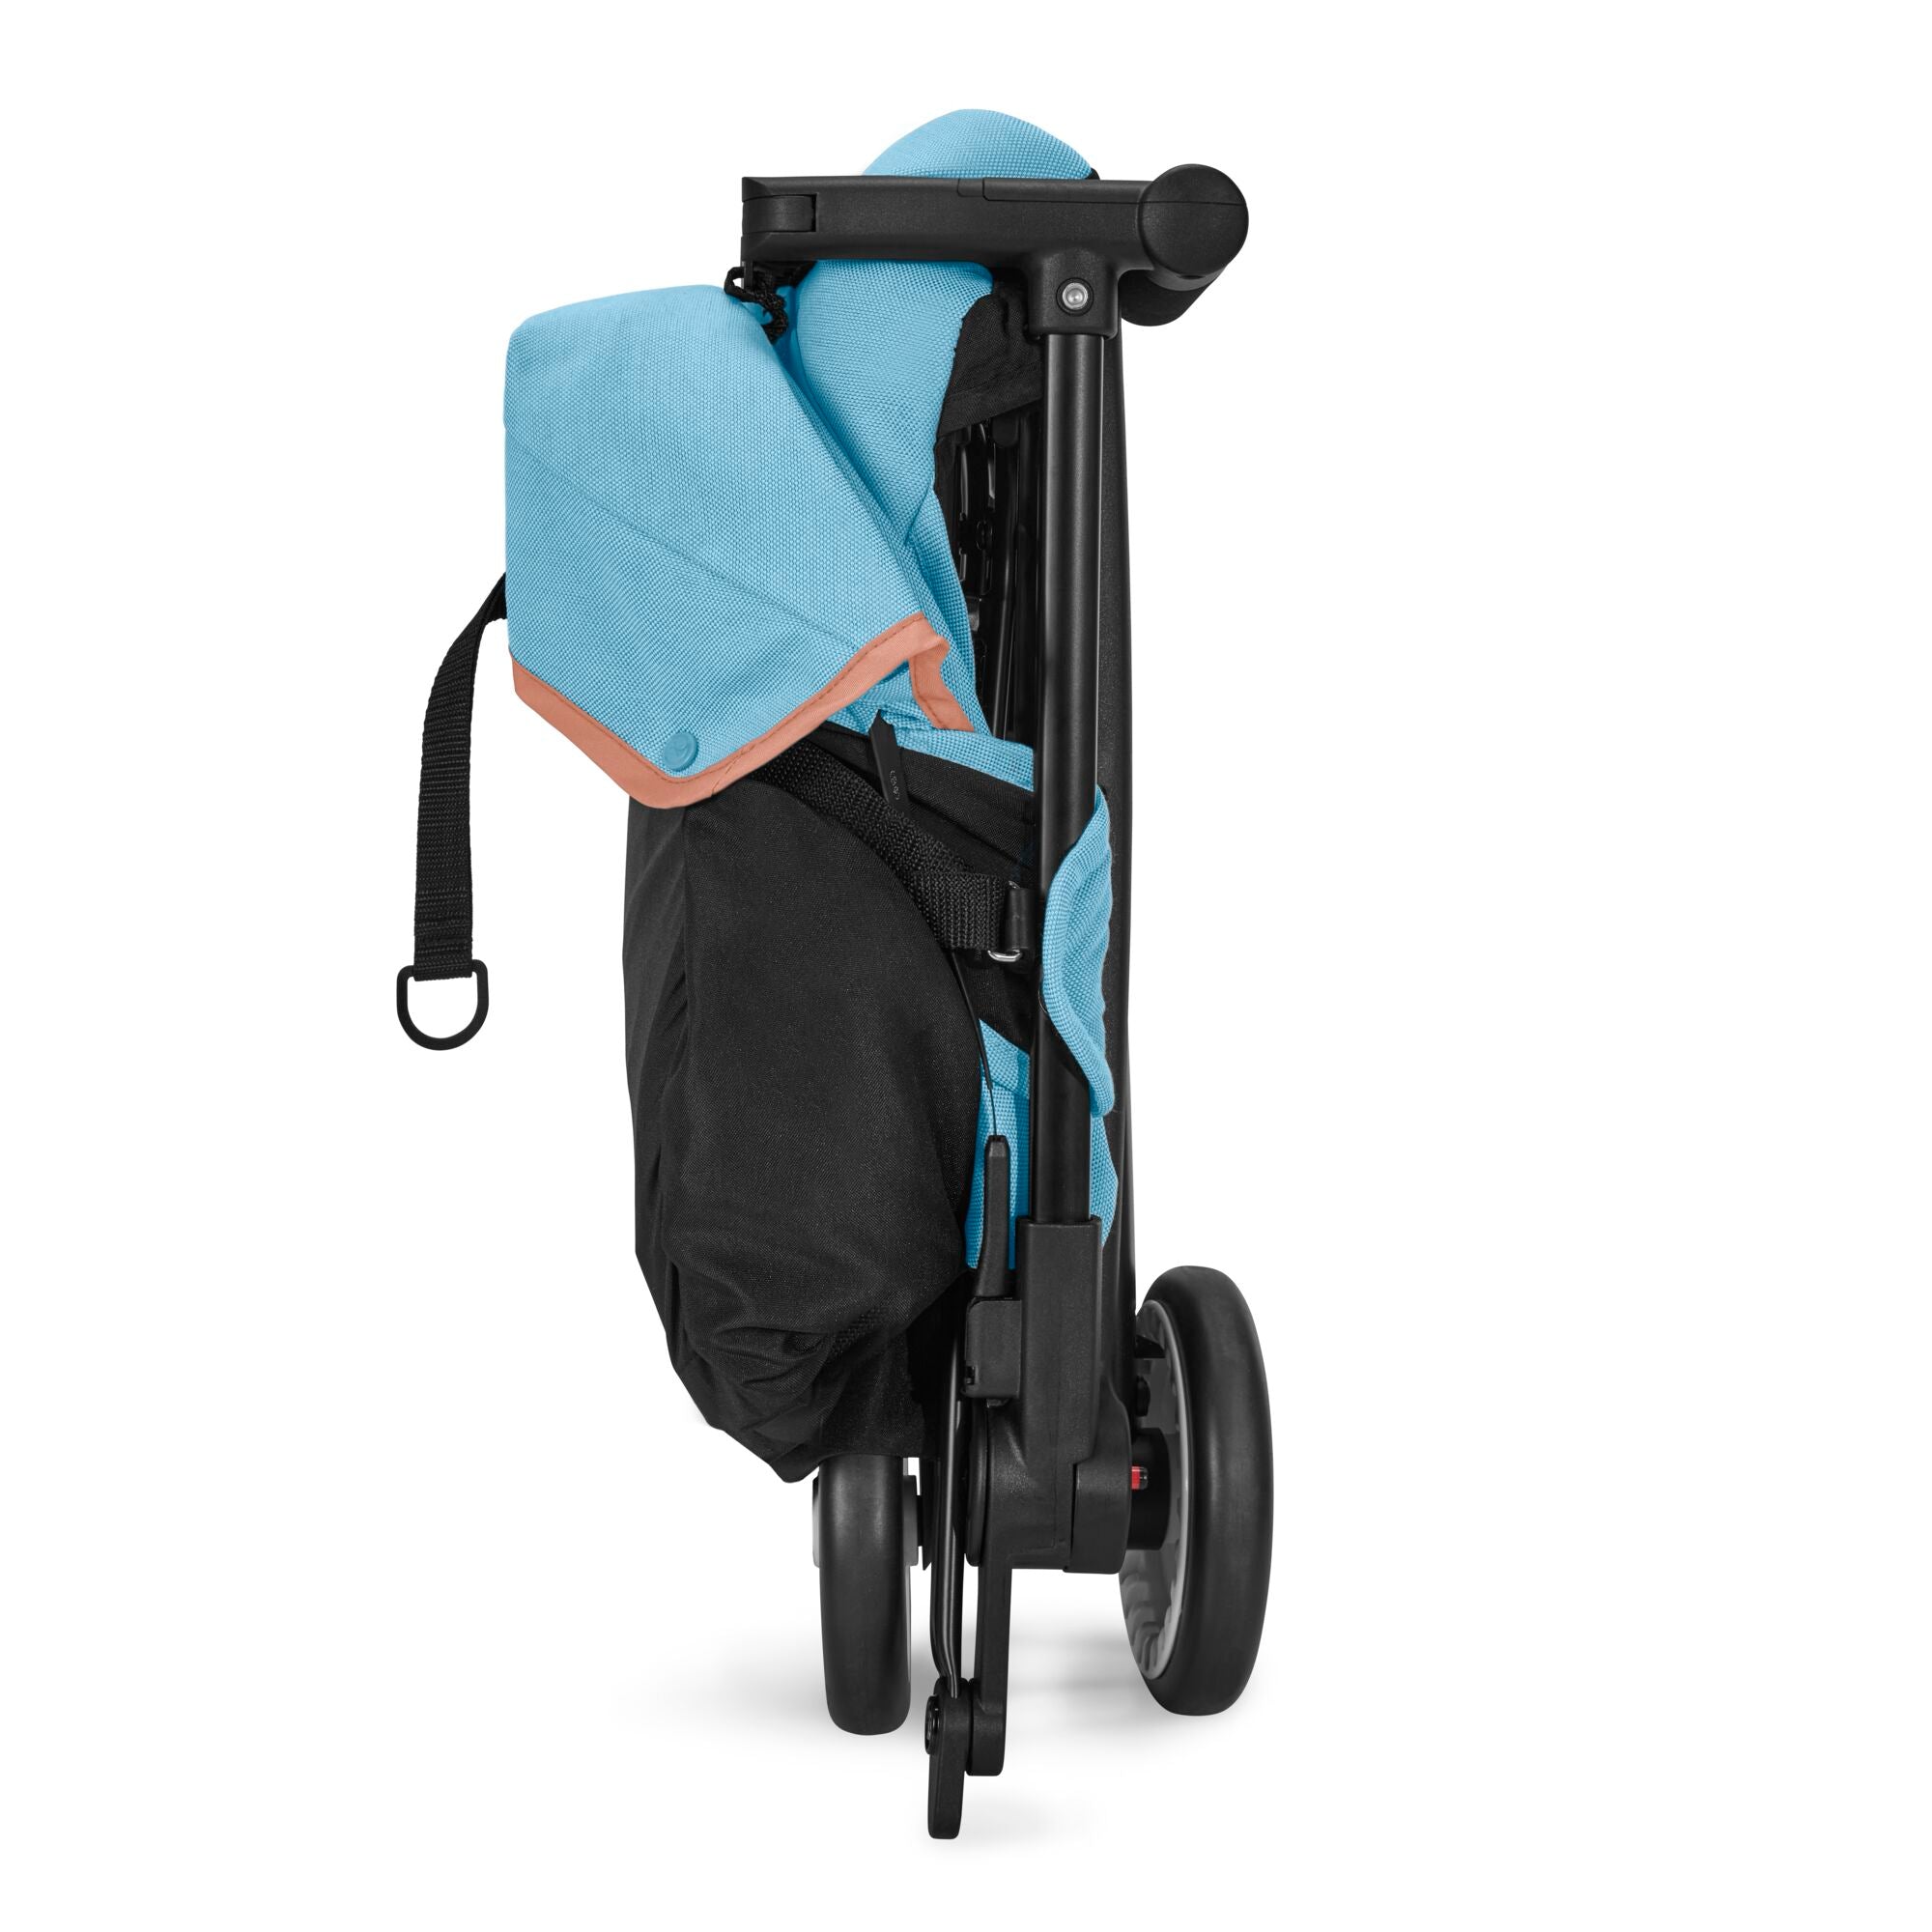 Buggy LIBELLE Cybex Gold bei www.harmony-ambiente.at | Buggy Libelle falten